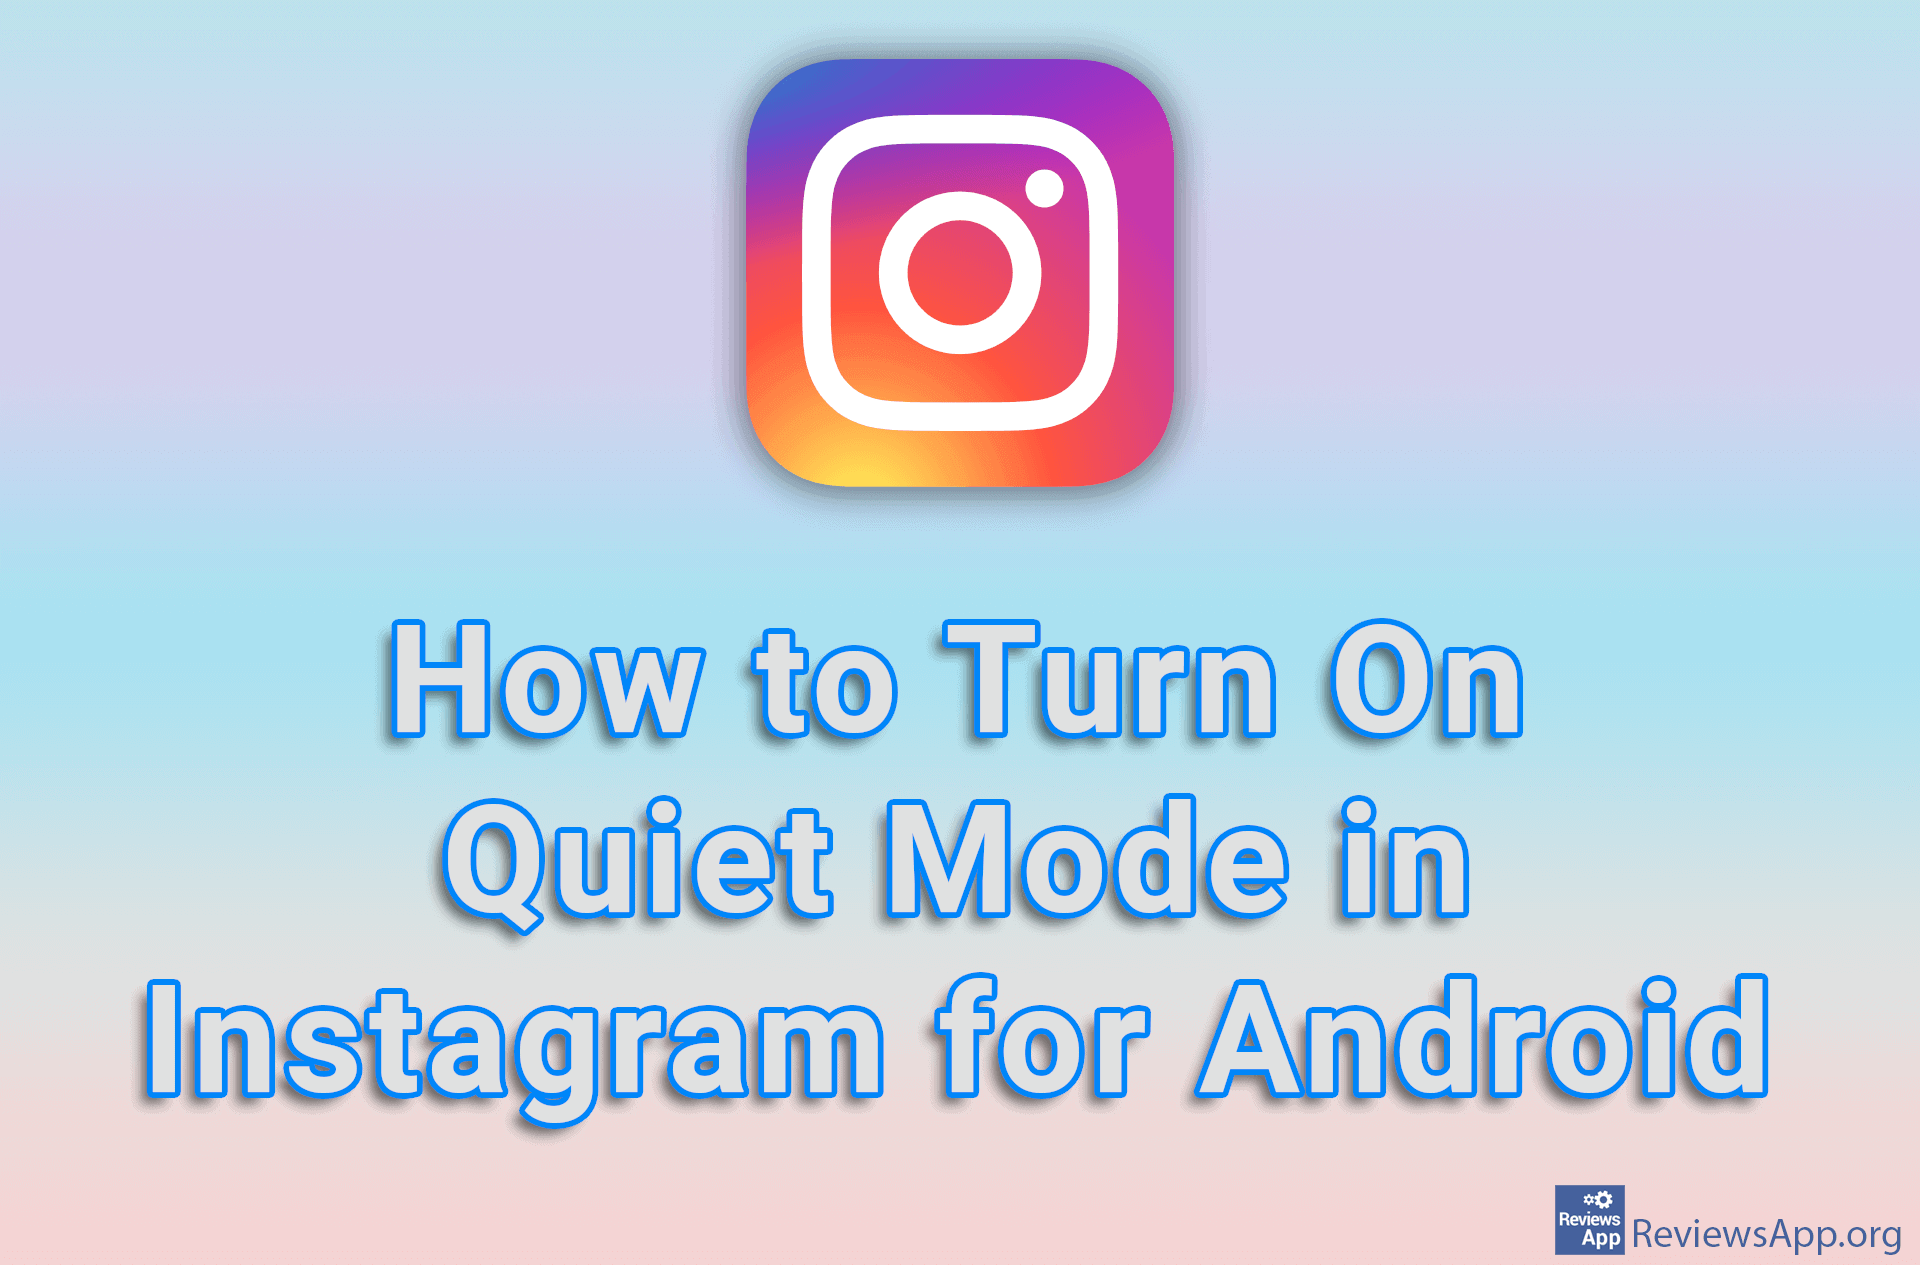 How to Turn On Quiet Mode in Instagram for Android